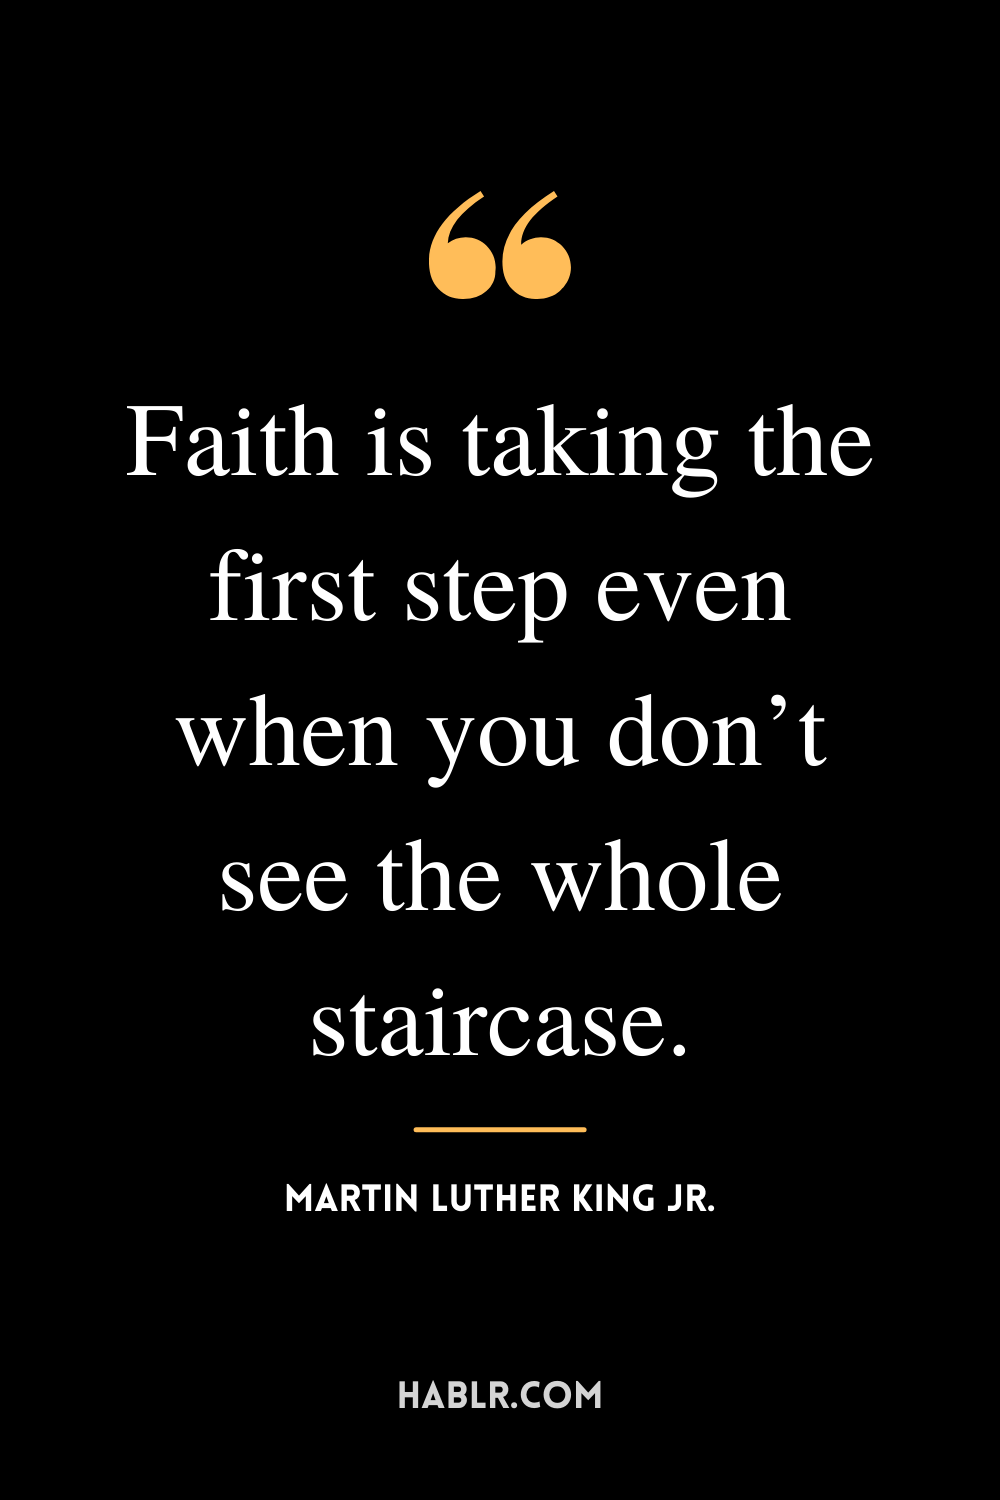 “Faith is taking the first step even when you don’t see the whole staircase.” -Martin Luther King Jr.